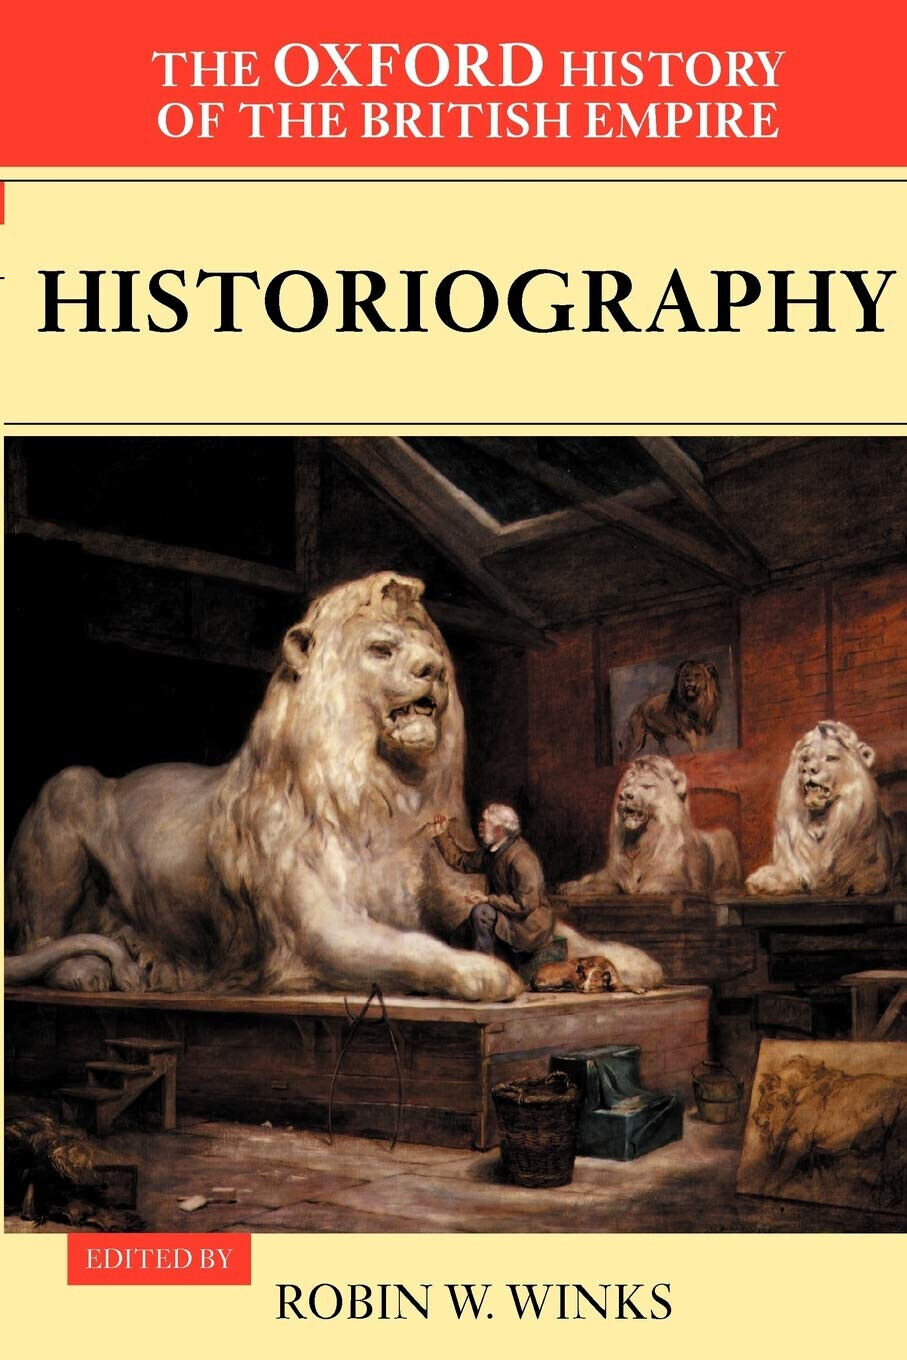 The Oxford History of the British Empire: Volume V: Historiography - 2001